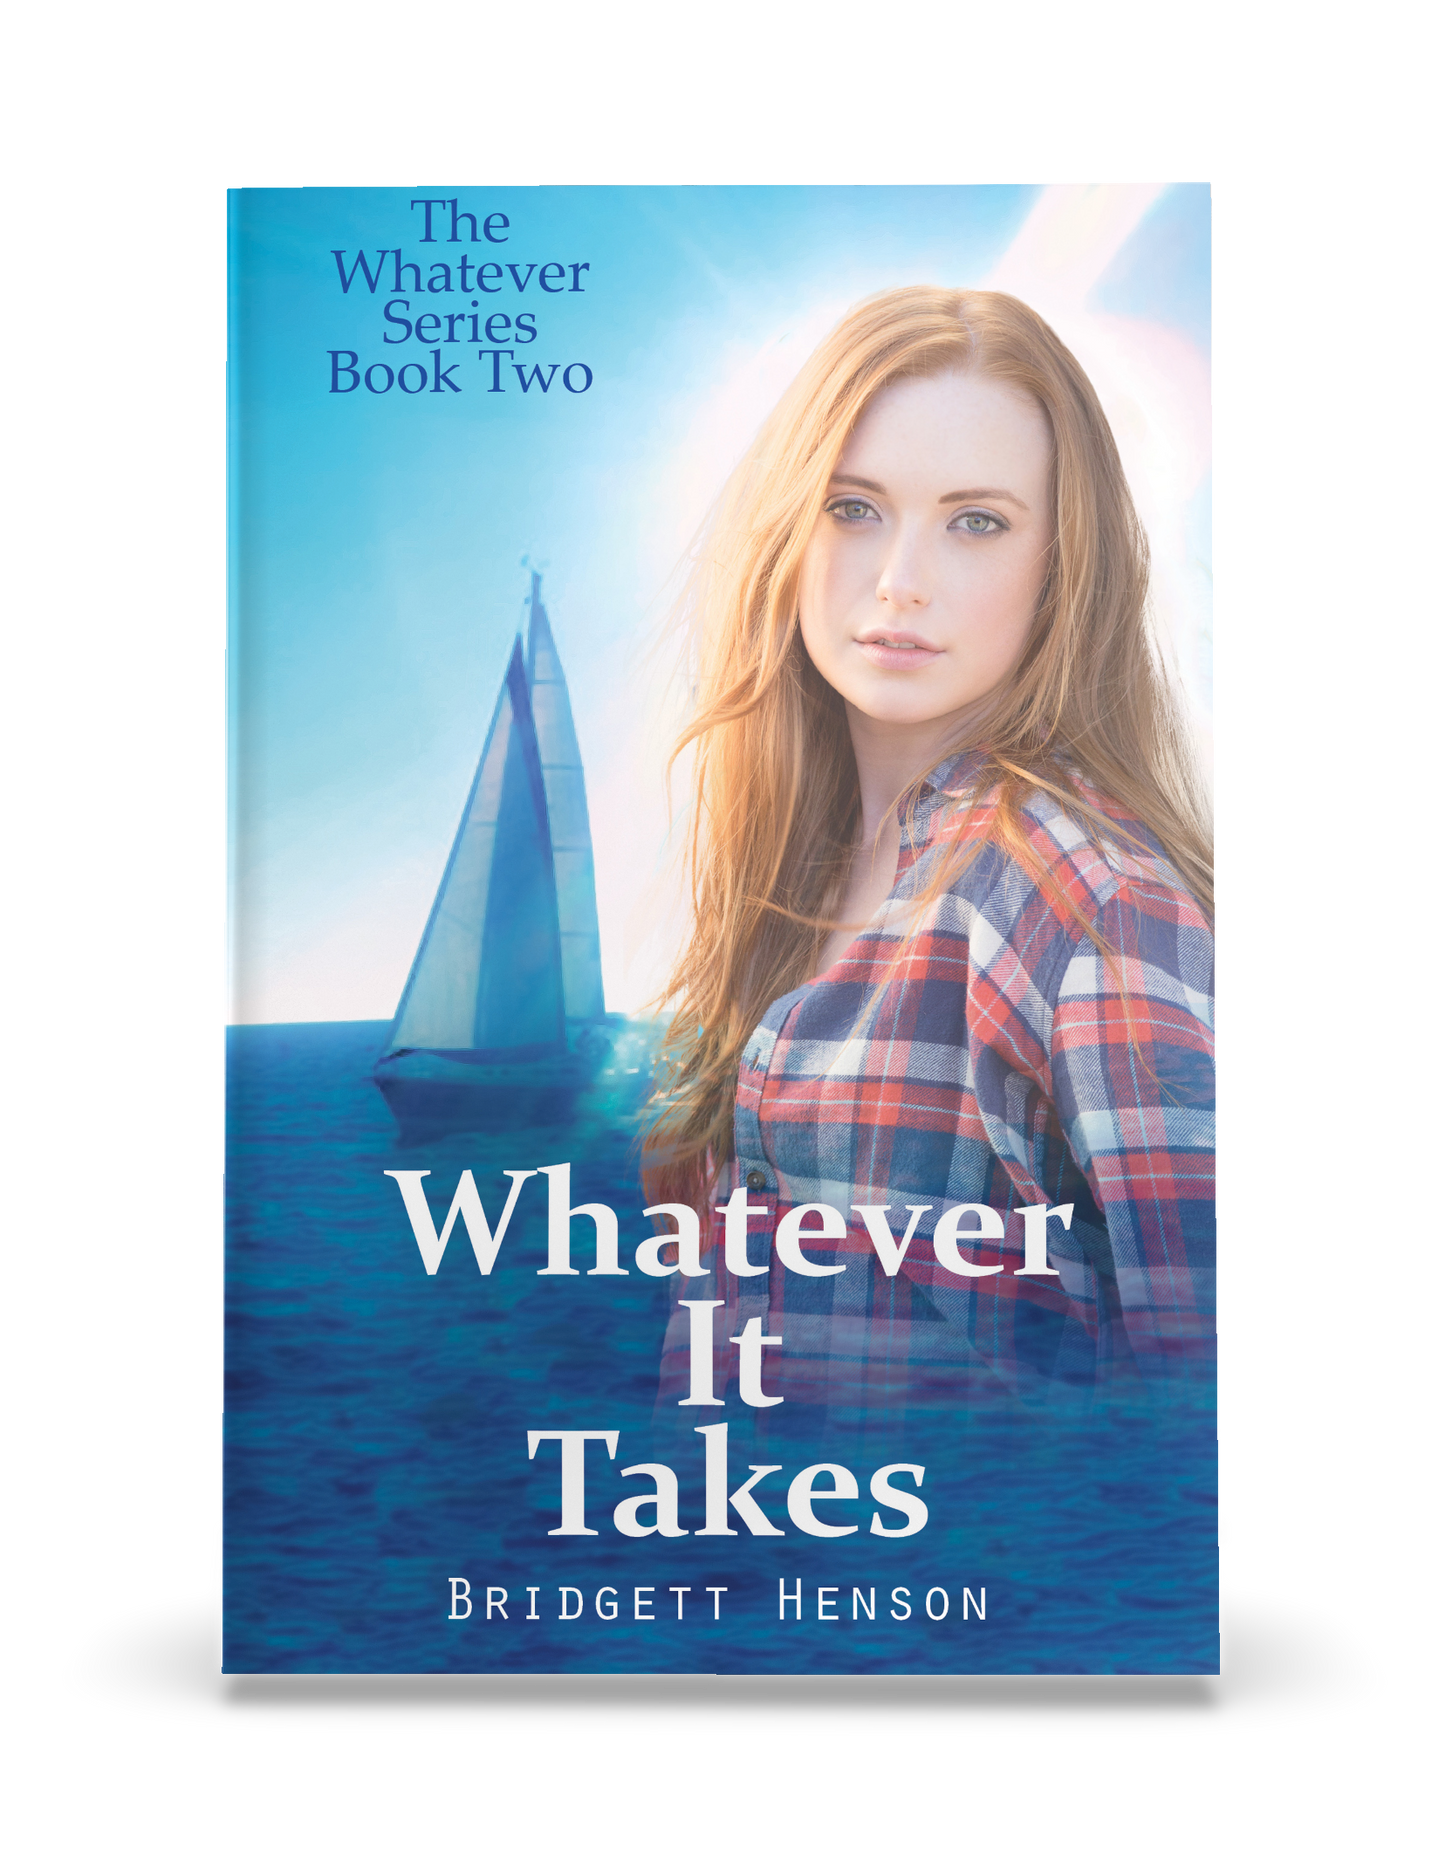 Whatever It Takes by Bridgett Henson Book 2 of The Whatever Series